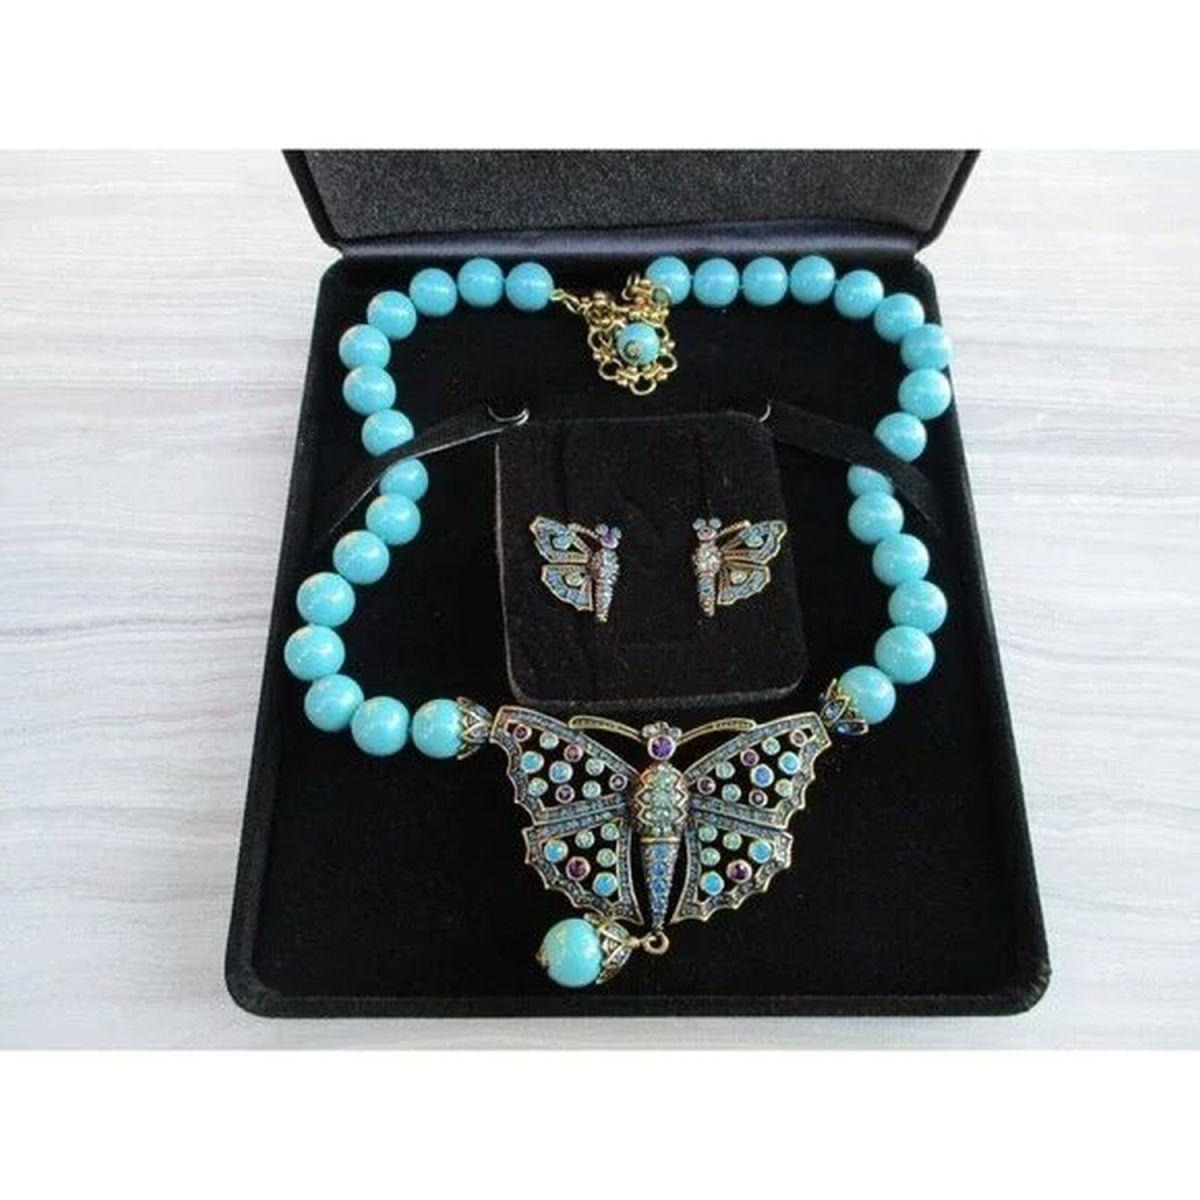 Simply Beautiful! Designer Heidi Daus Monarch Madness Butterfly Necklace and Earring Set. Beautiful bronze/gold tone butterfly embellished with various blue and purple Swarovski crystals, suspended from a faux Turquoise Bead Necklace. Fun and